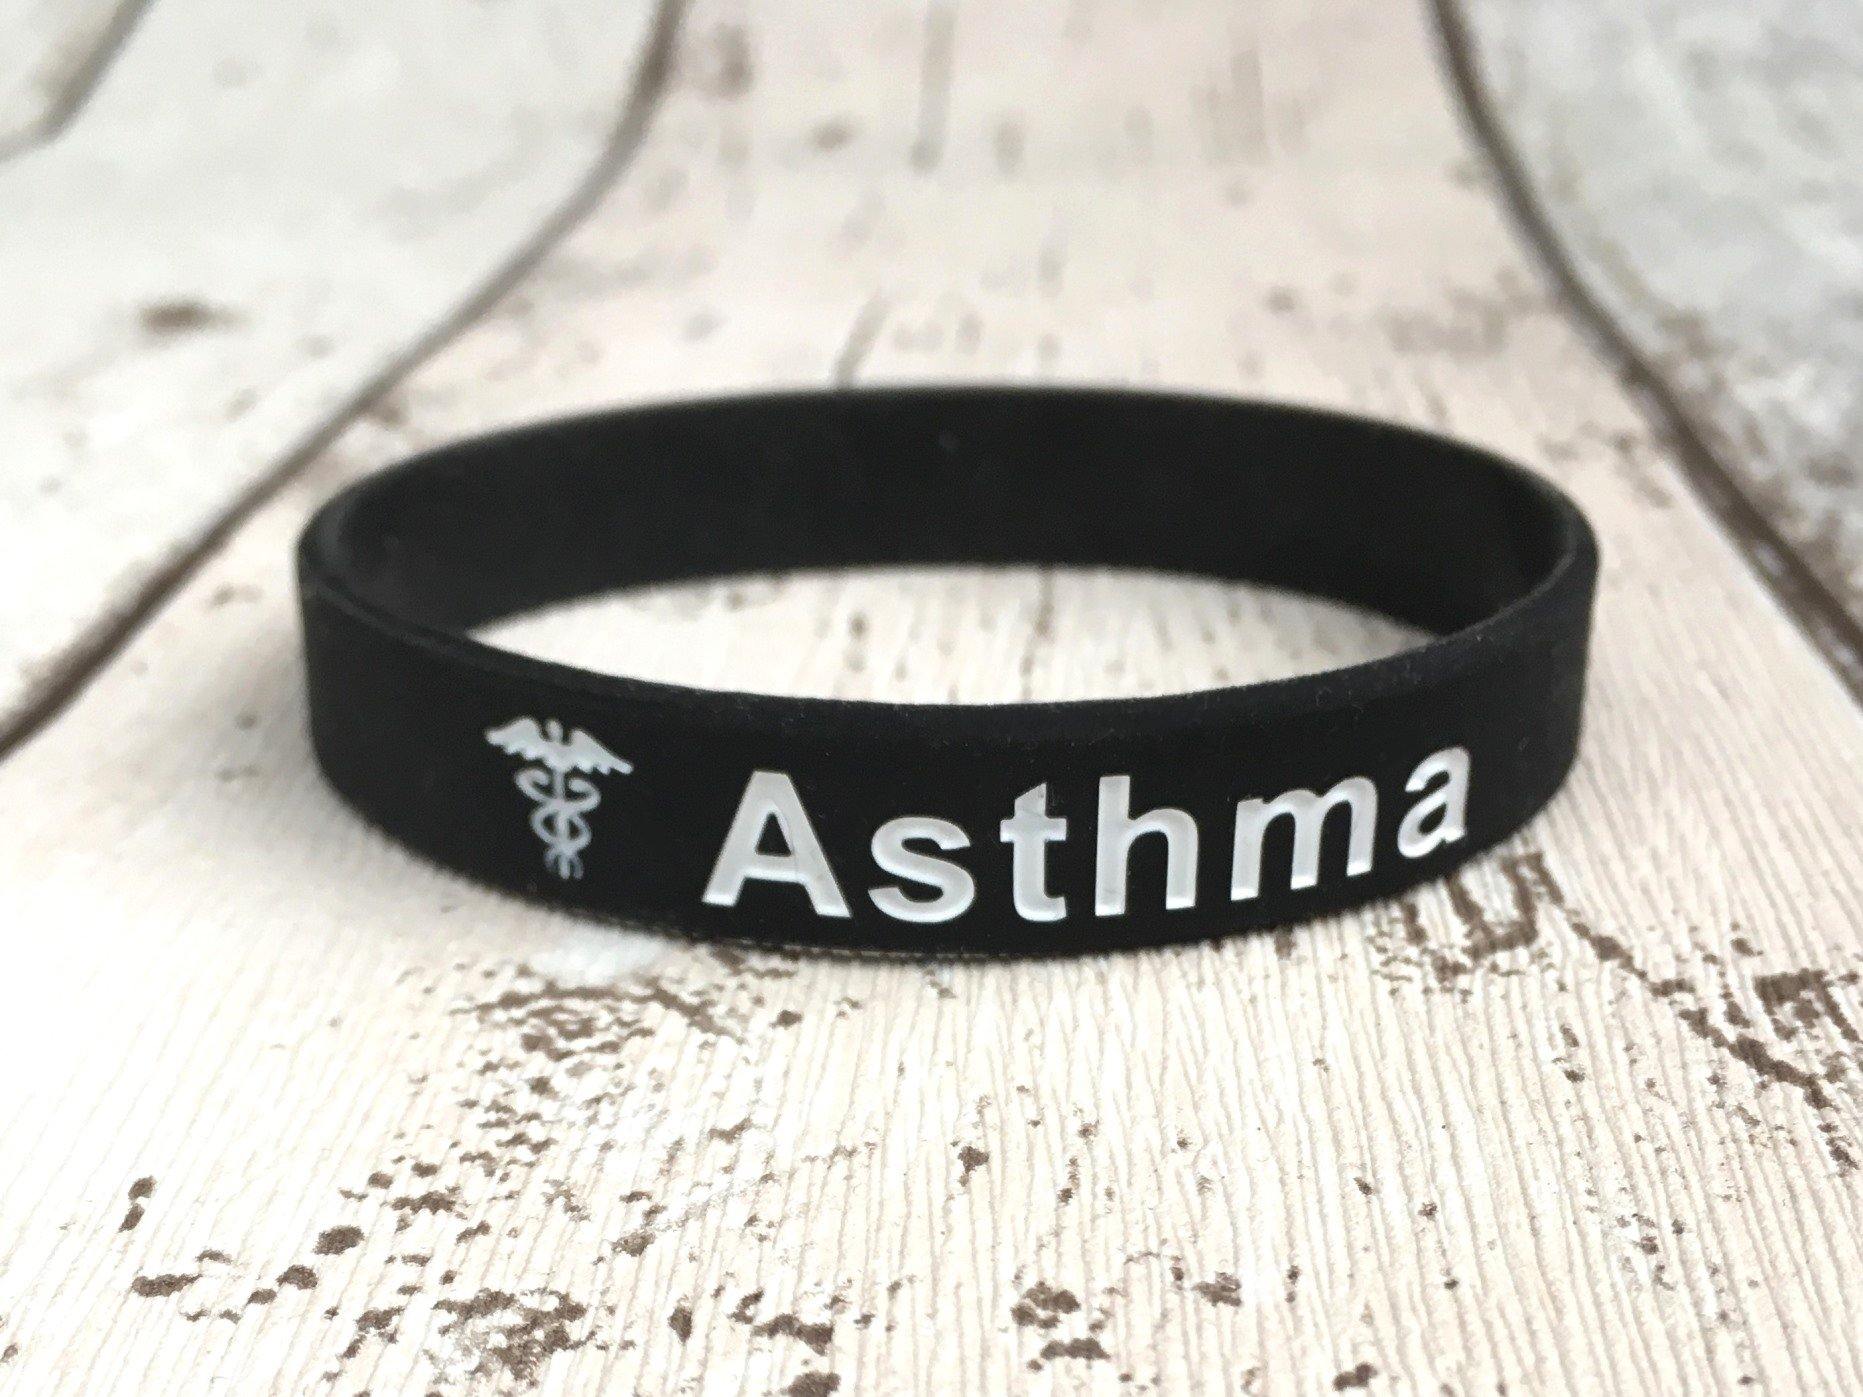 Medical alert jewellery for Asthma, COPD or Lung conditions